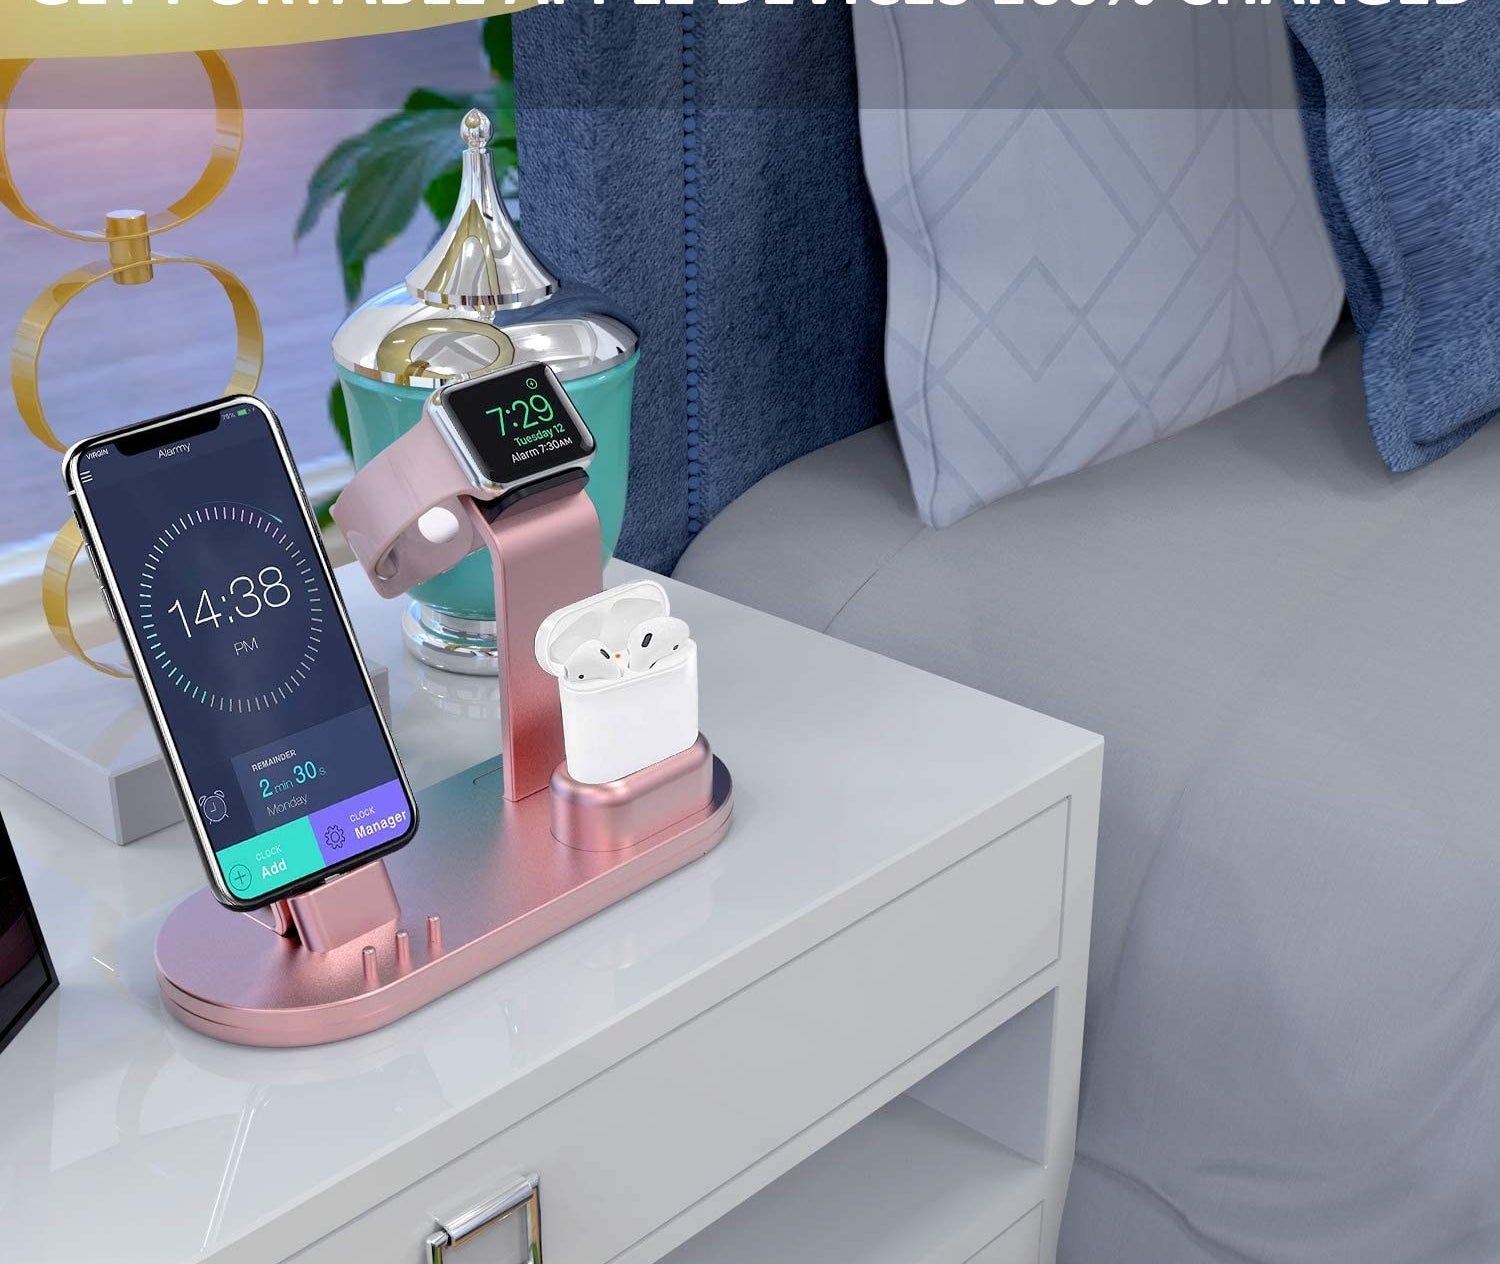 the charging stand holding two devices